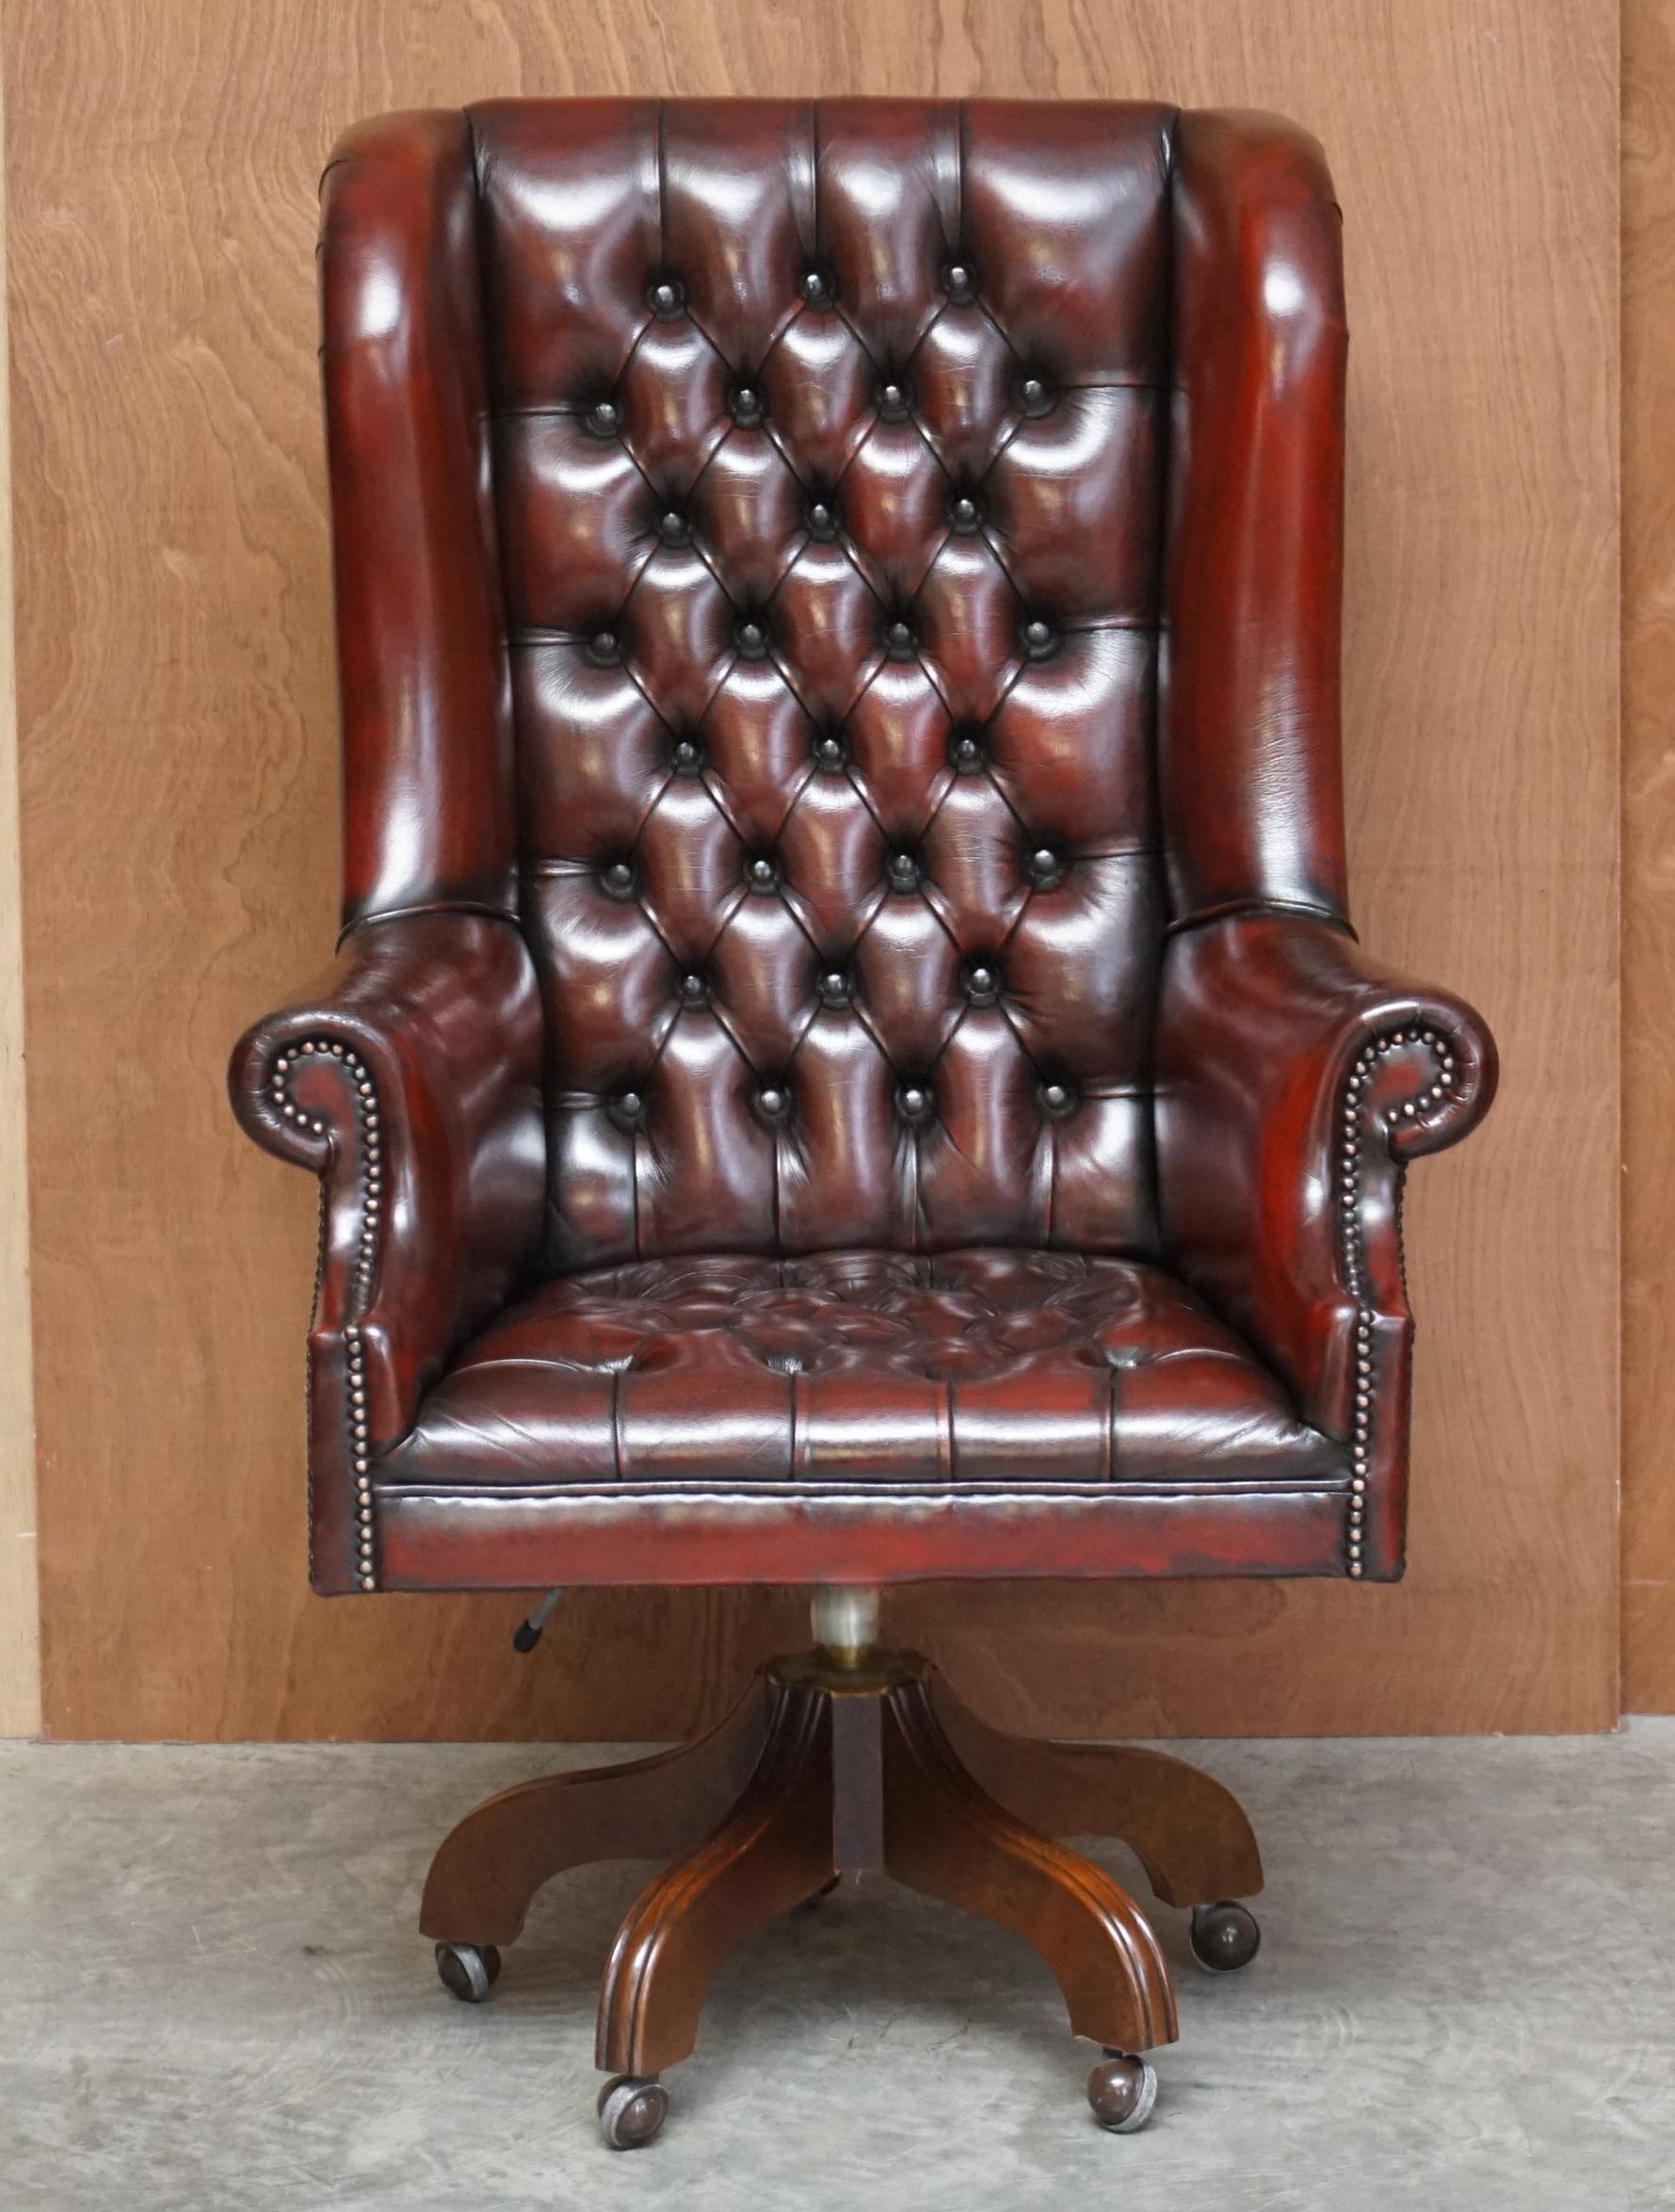 We are delighted to offer for sale this stunning restored hand dyed Bordeaux leather very large Chesterfield Wingback office chair with original leather and patina

This is a very comfortable captain’s indeed, it’s like your favourite reading